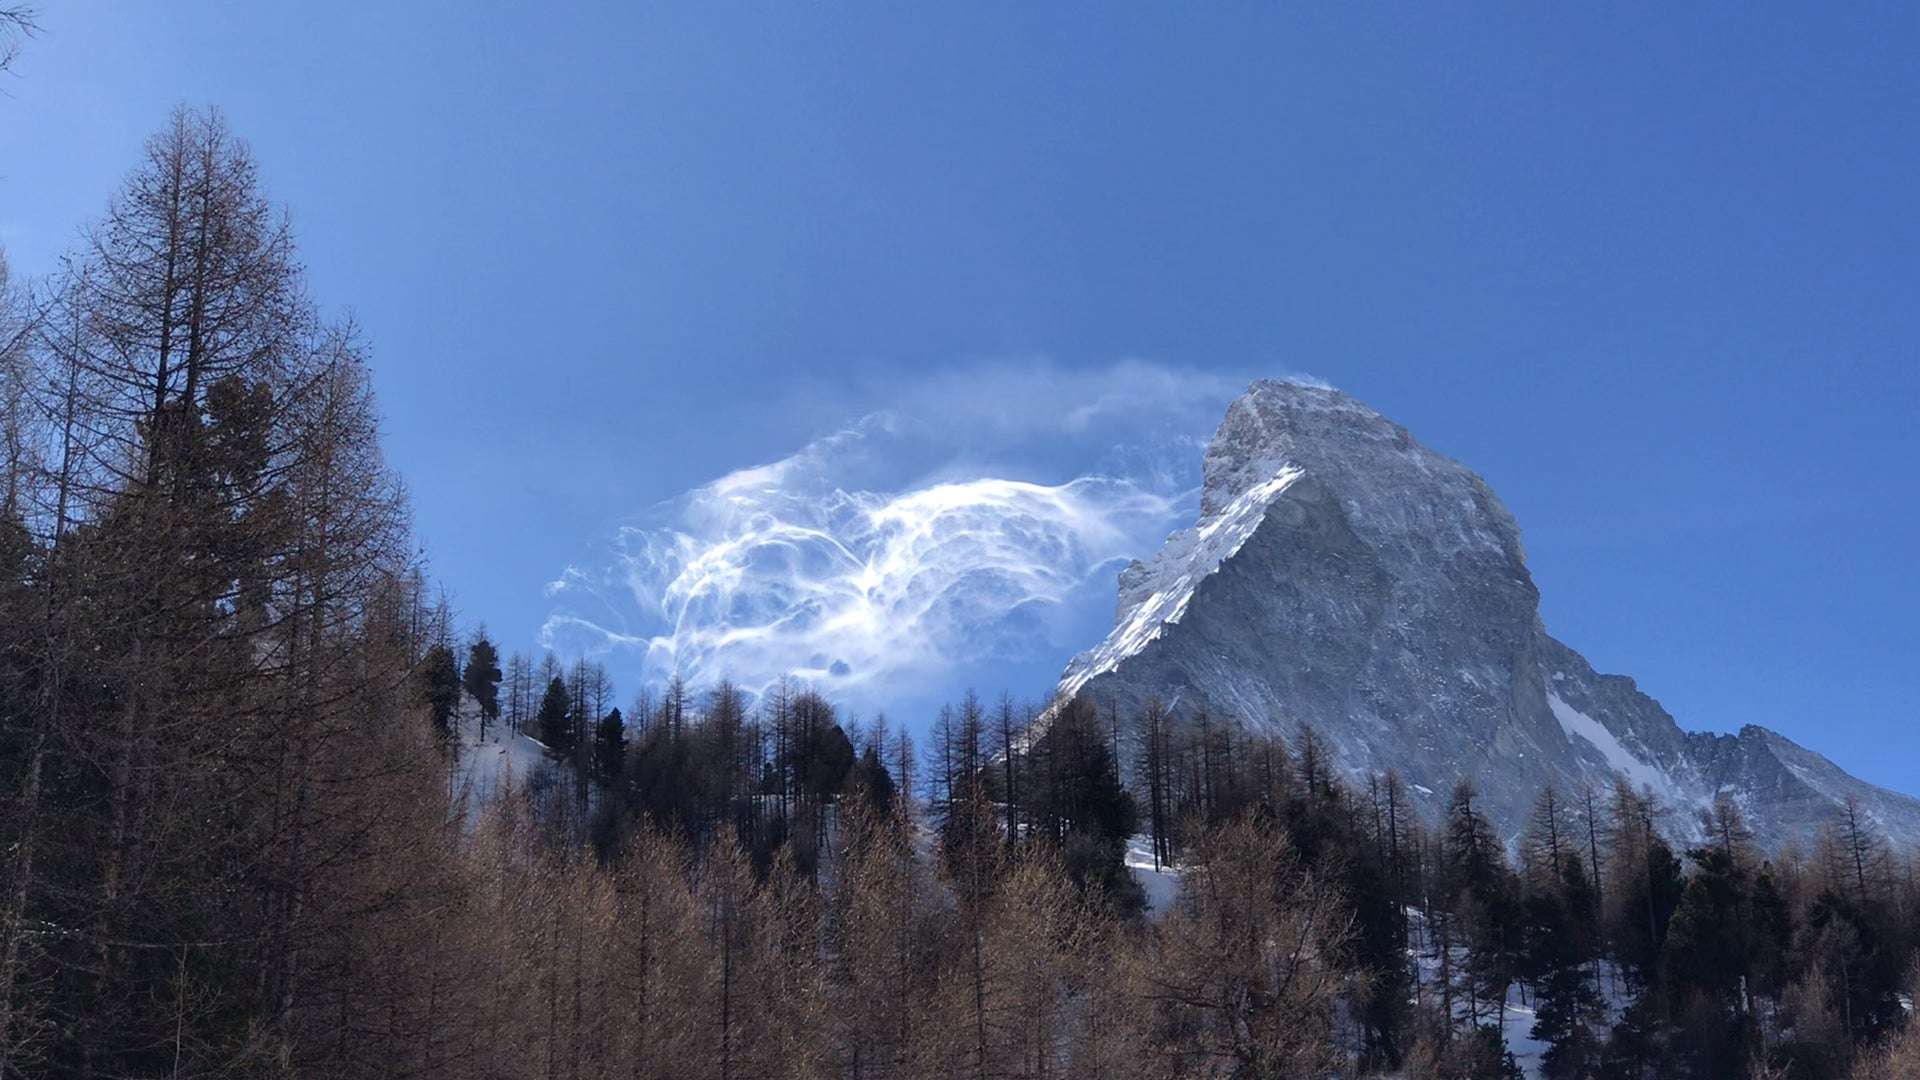 image for Snow blowing off the Matterhorn : woahdude